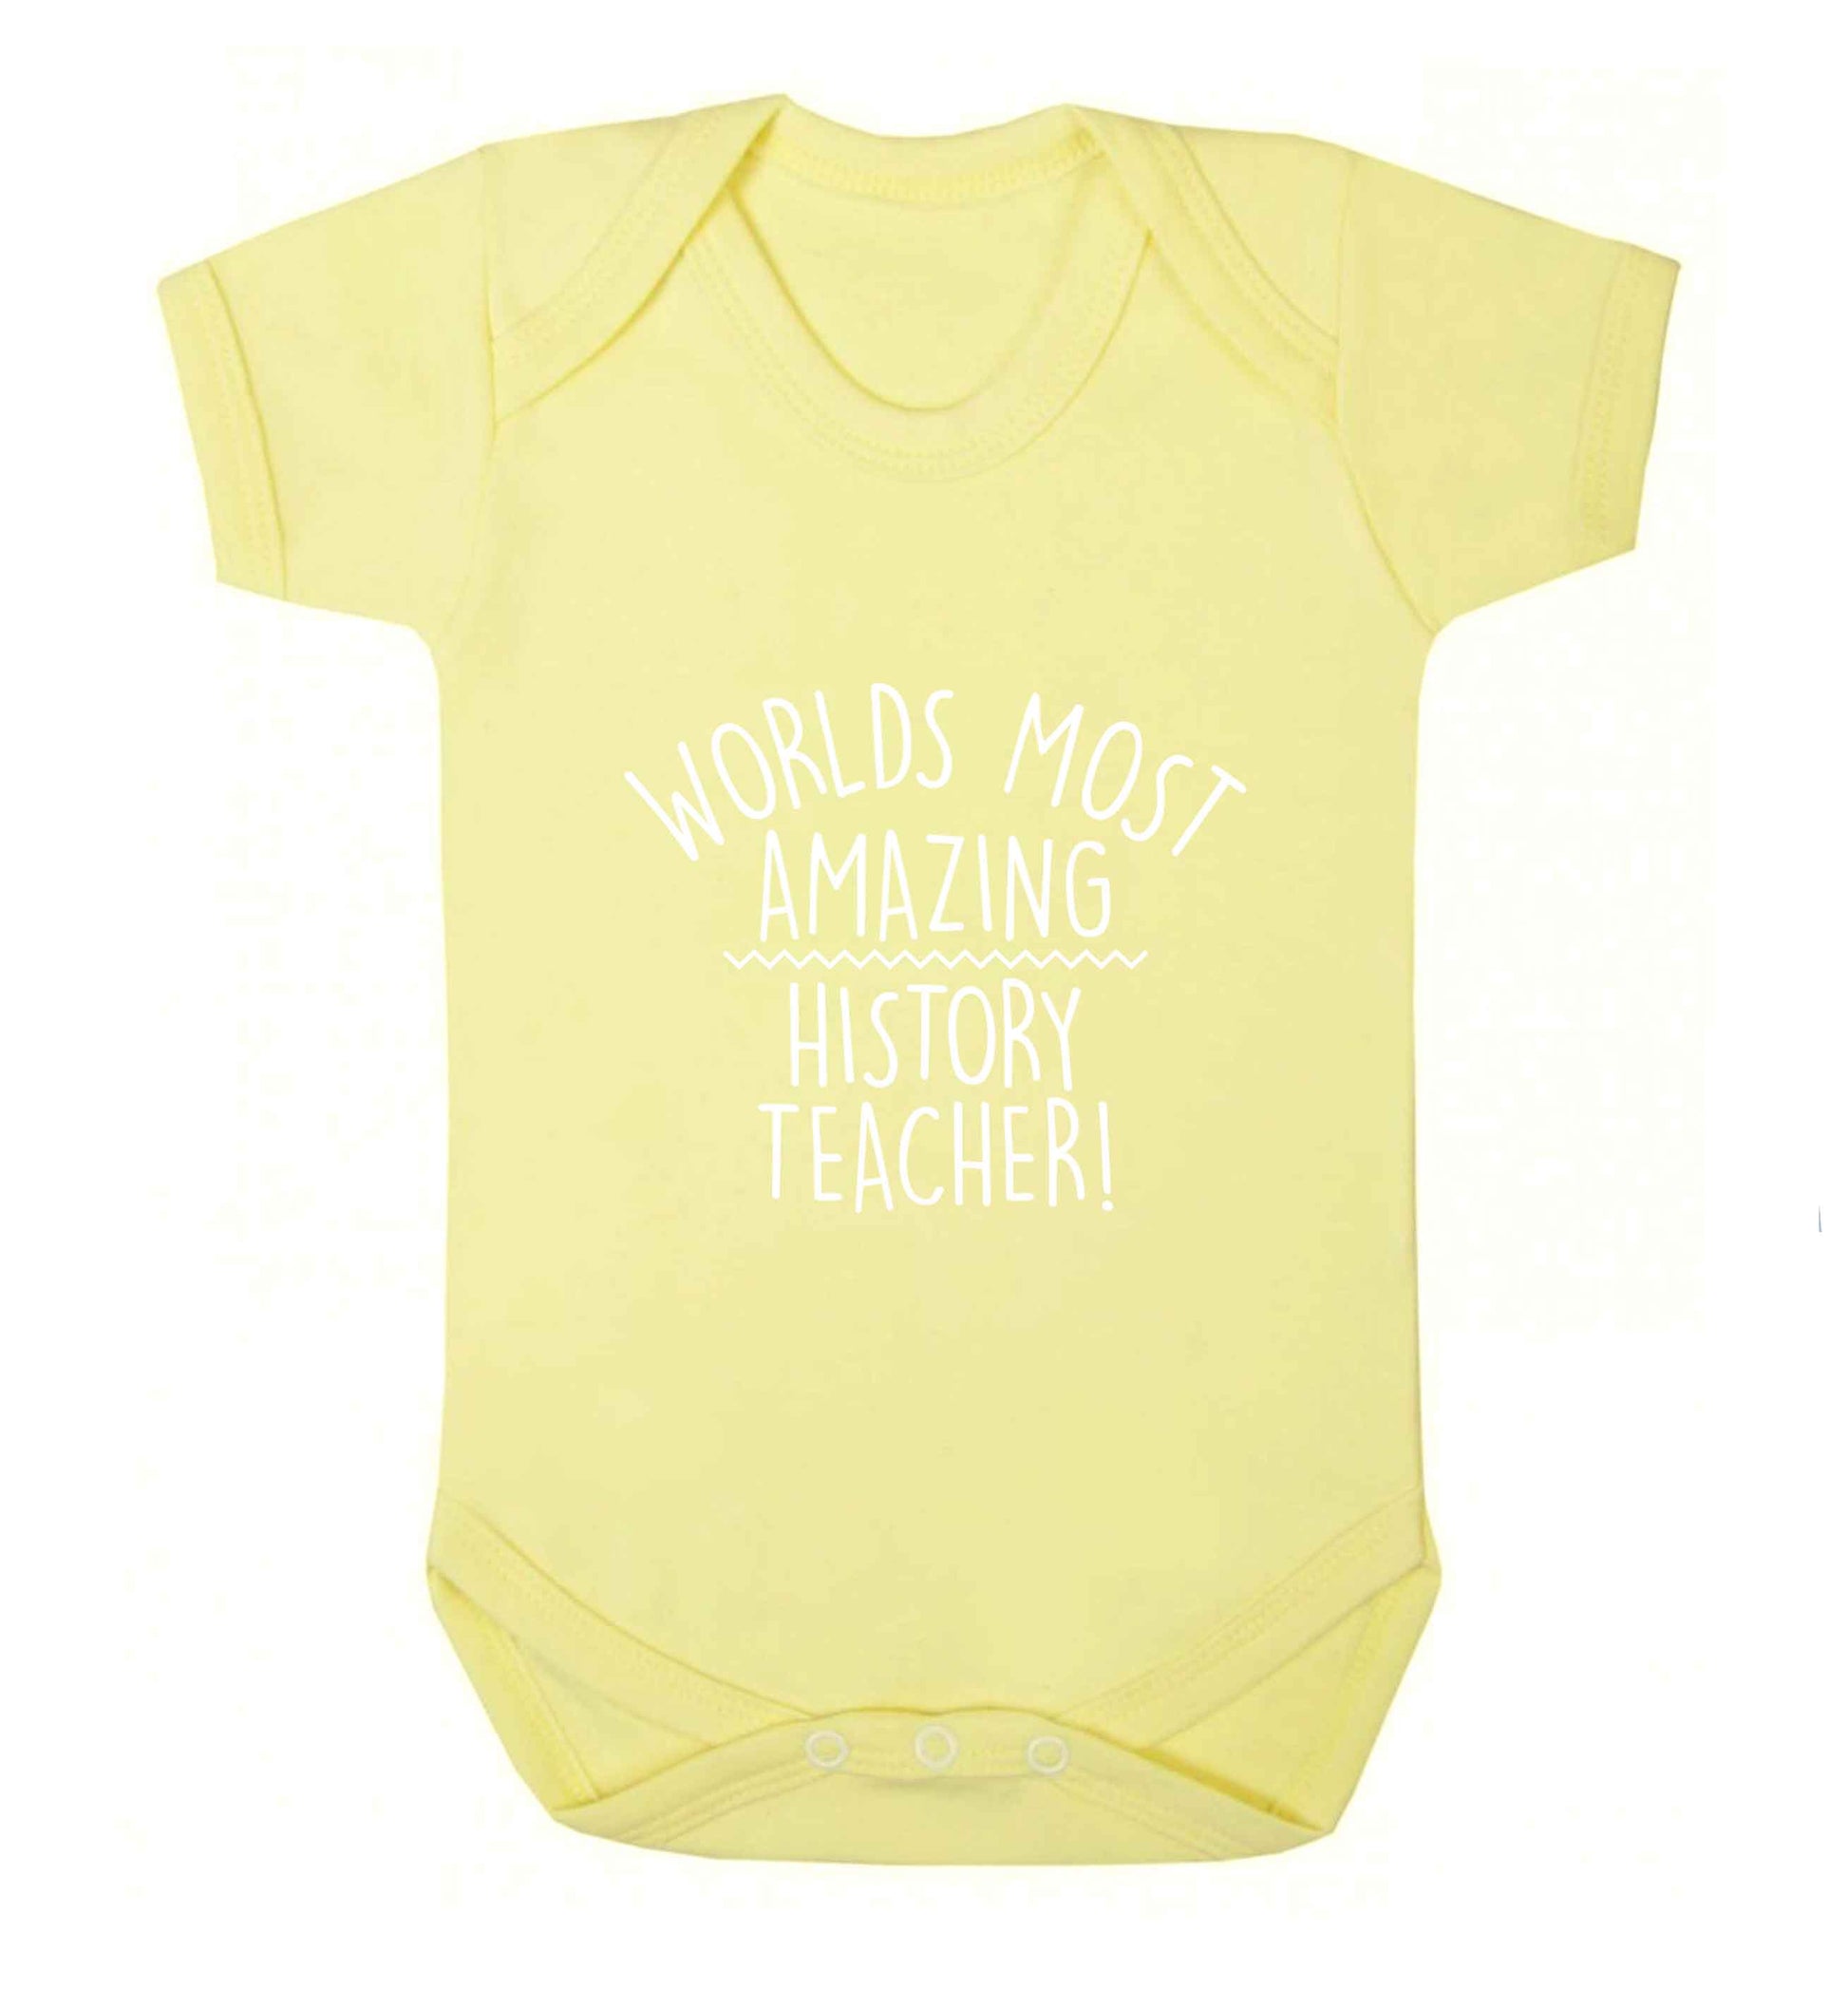 Worlds most amazing History teacher baby vest pale yellow 18-24 months